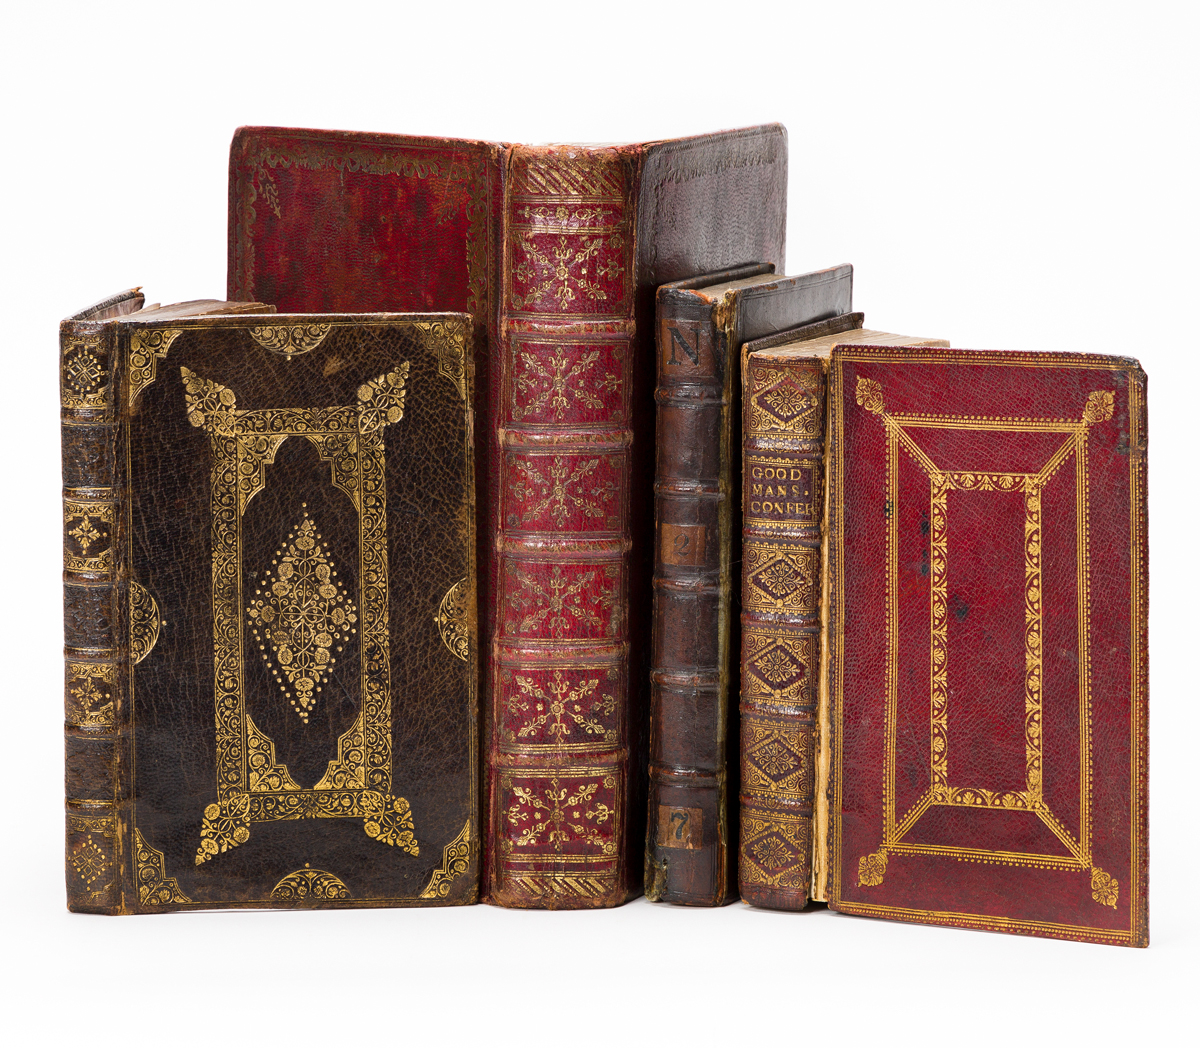 Early English Imprints in Fine Contemporary Bindings.